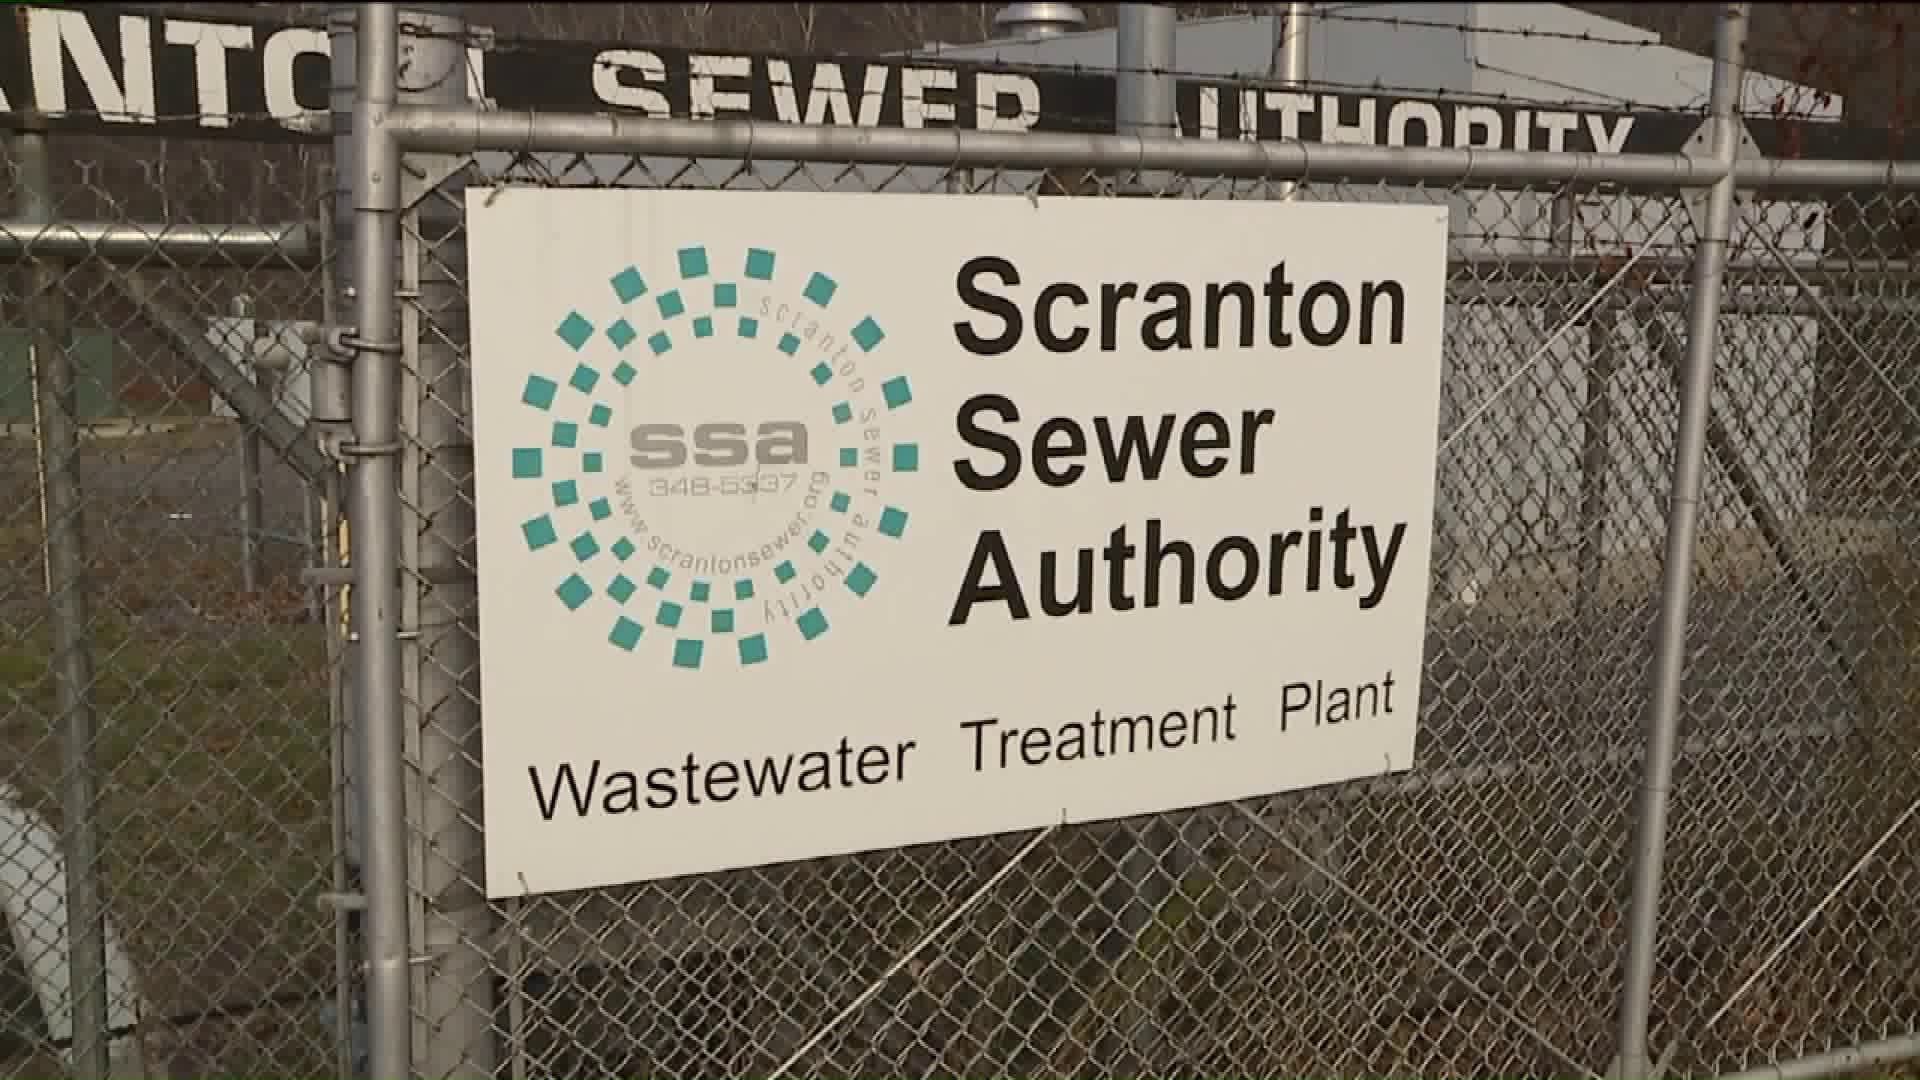 Sewer Sale Town Hall Meeting Set for Thursday